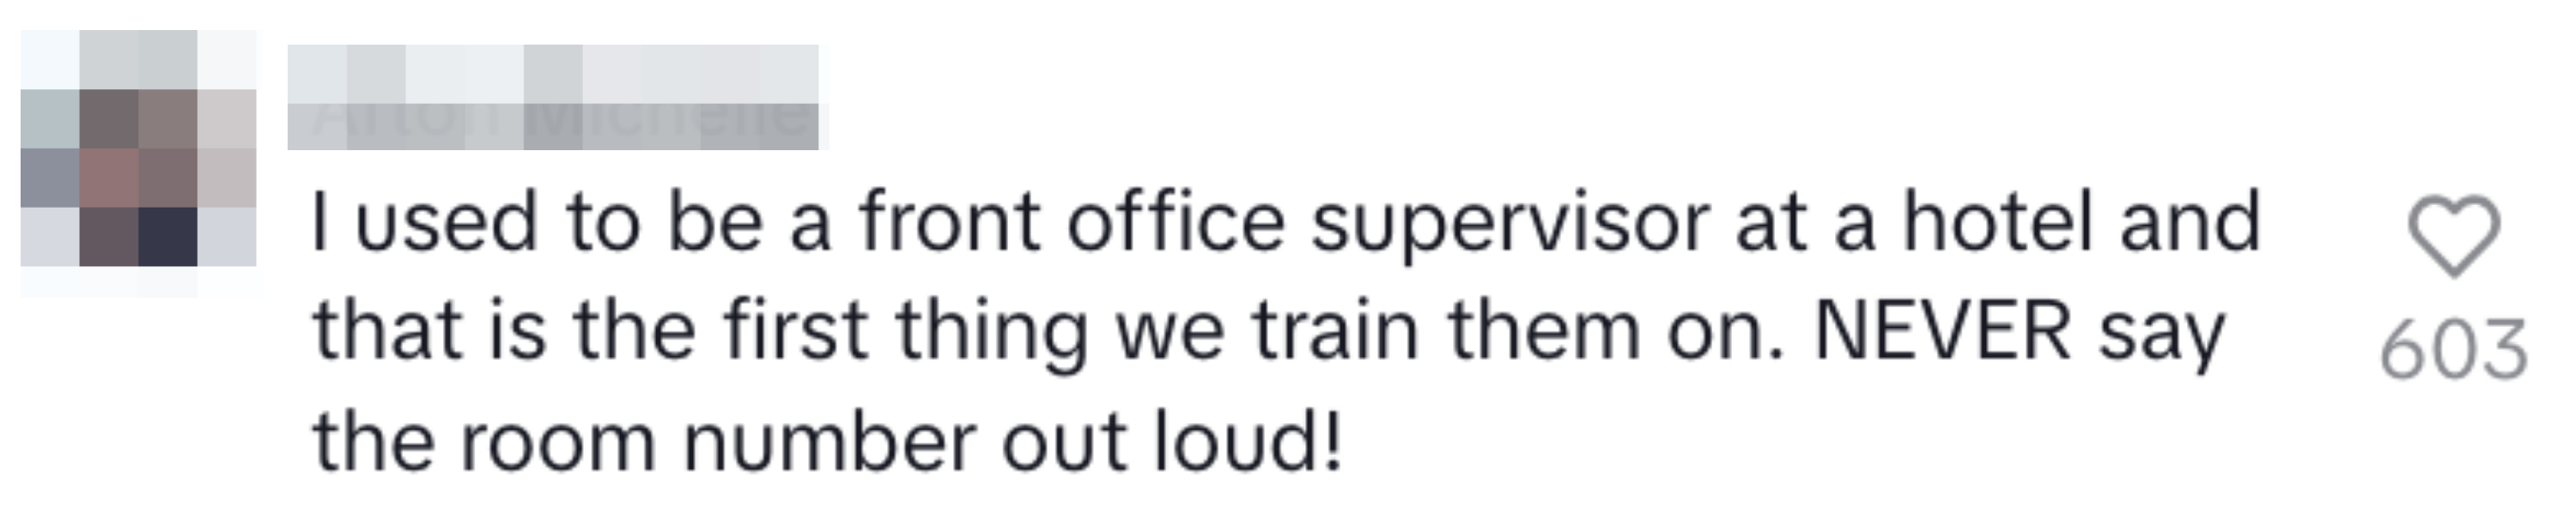 A comment that says, &quot;I used to be a front office supervisor at a hotel and that is the first thing we train them on; never say the room number out loud&quot;